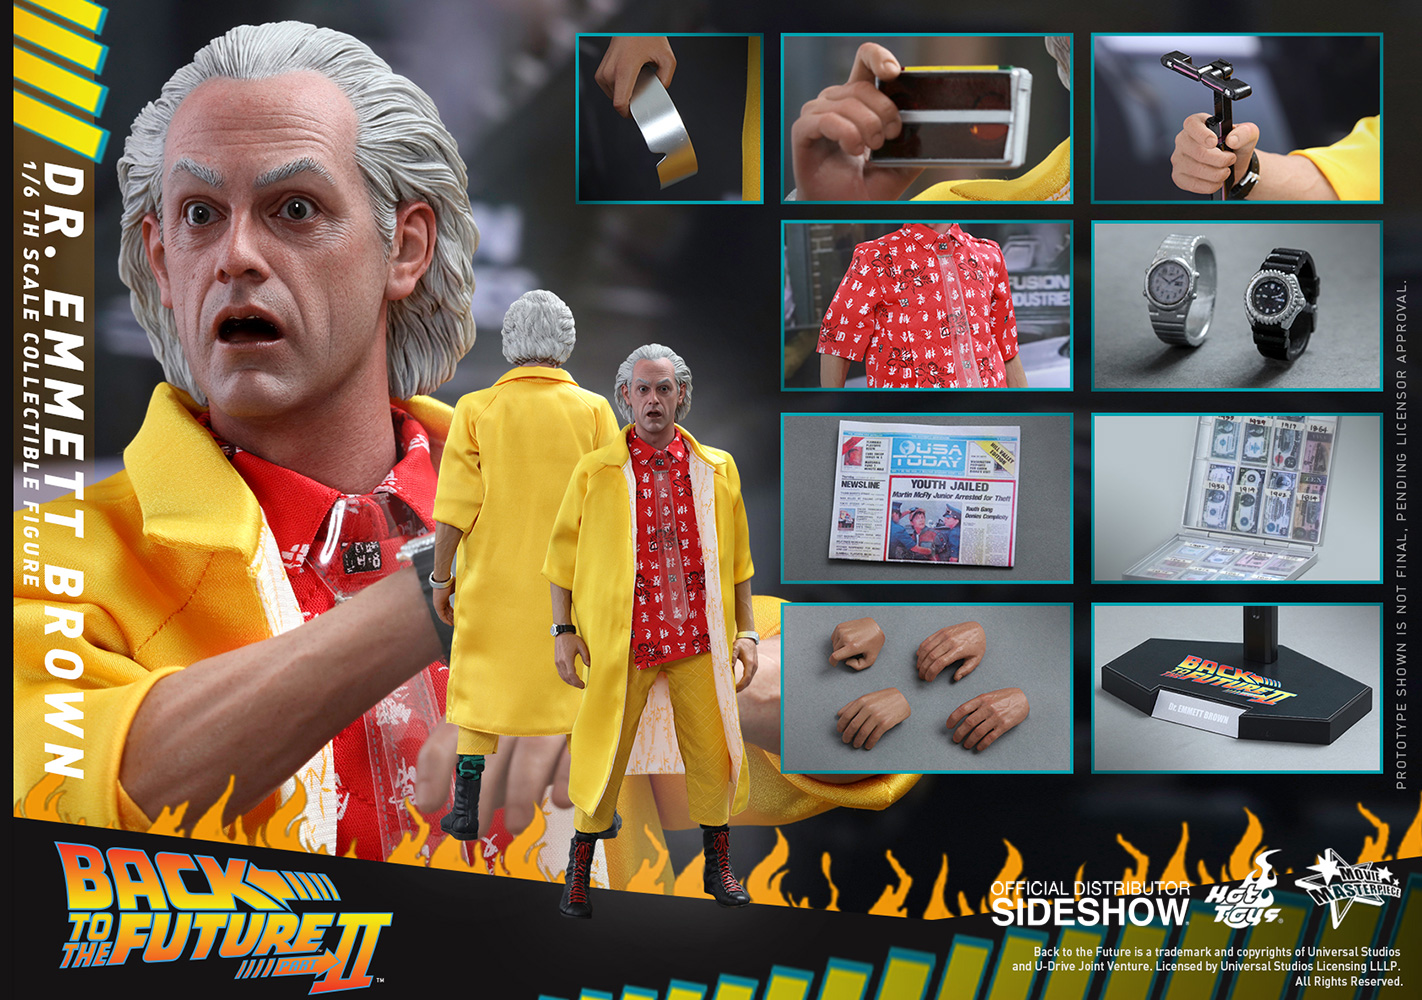 back-to-the-future-2-dr-emmett-brown-sixth-scale-hot-toys-902790-08